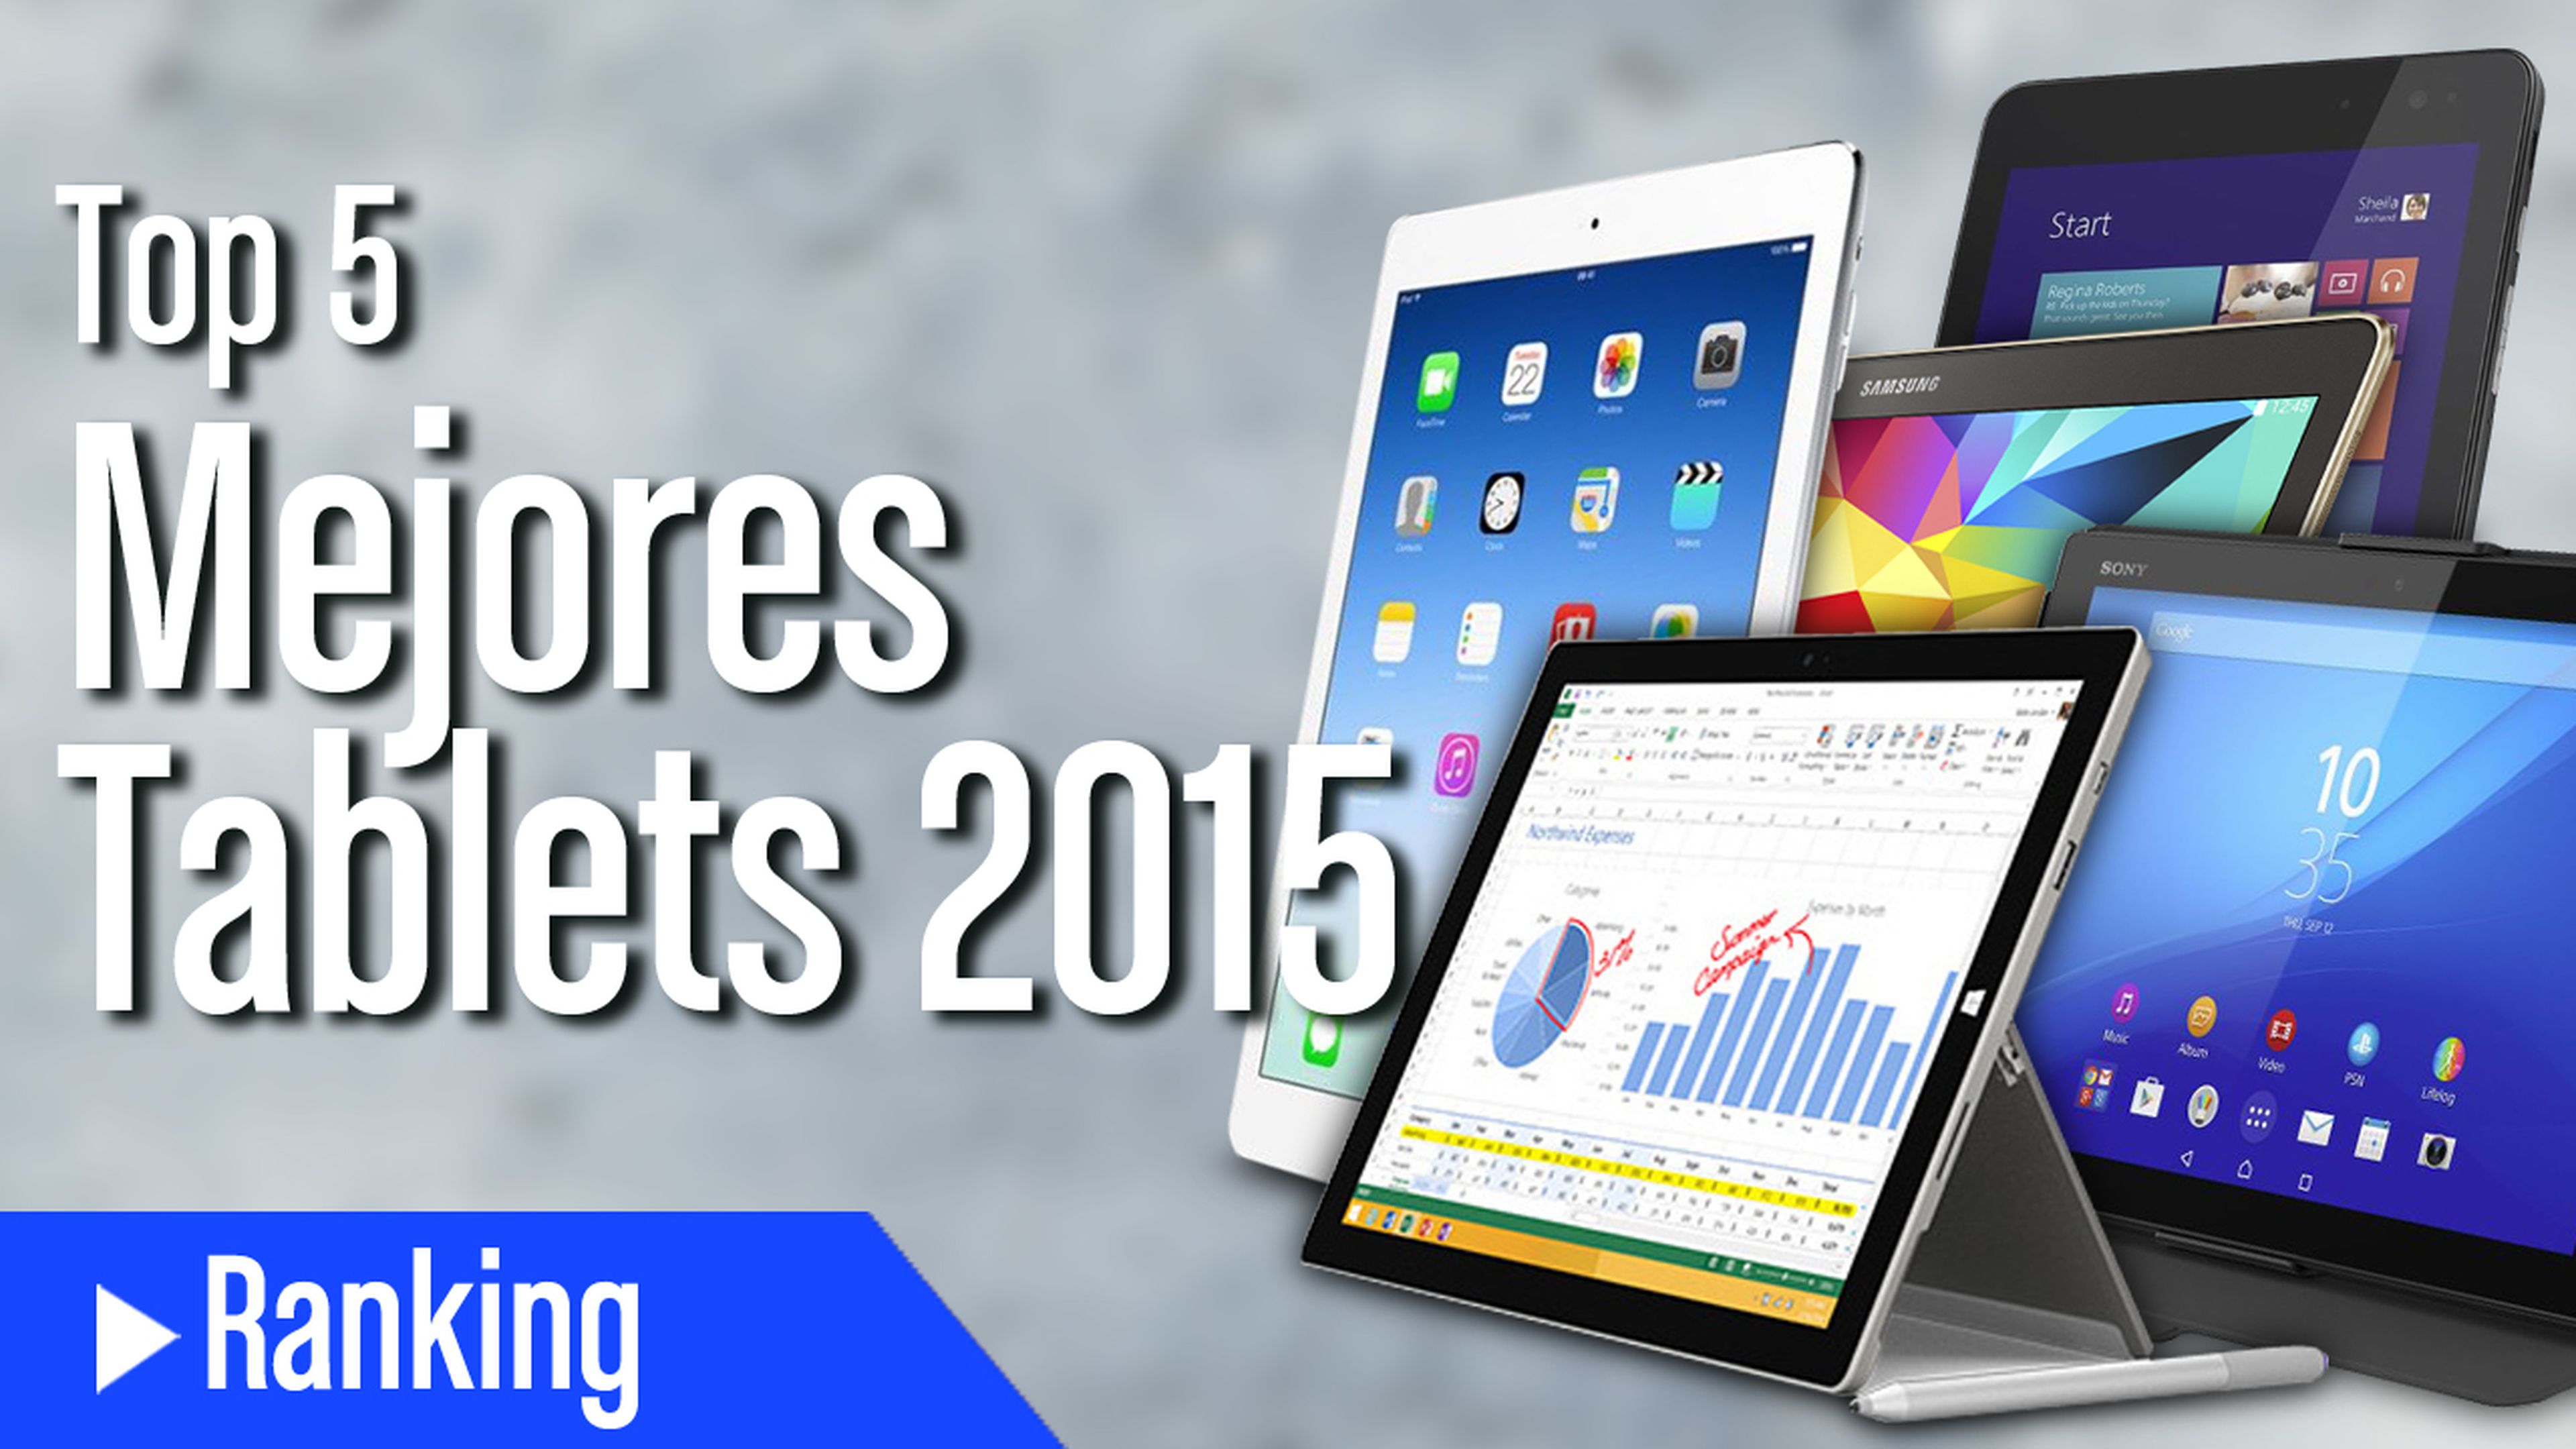 Top 5 Mejores Tablets